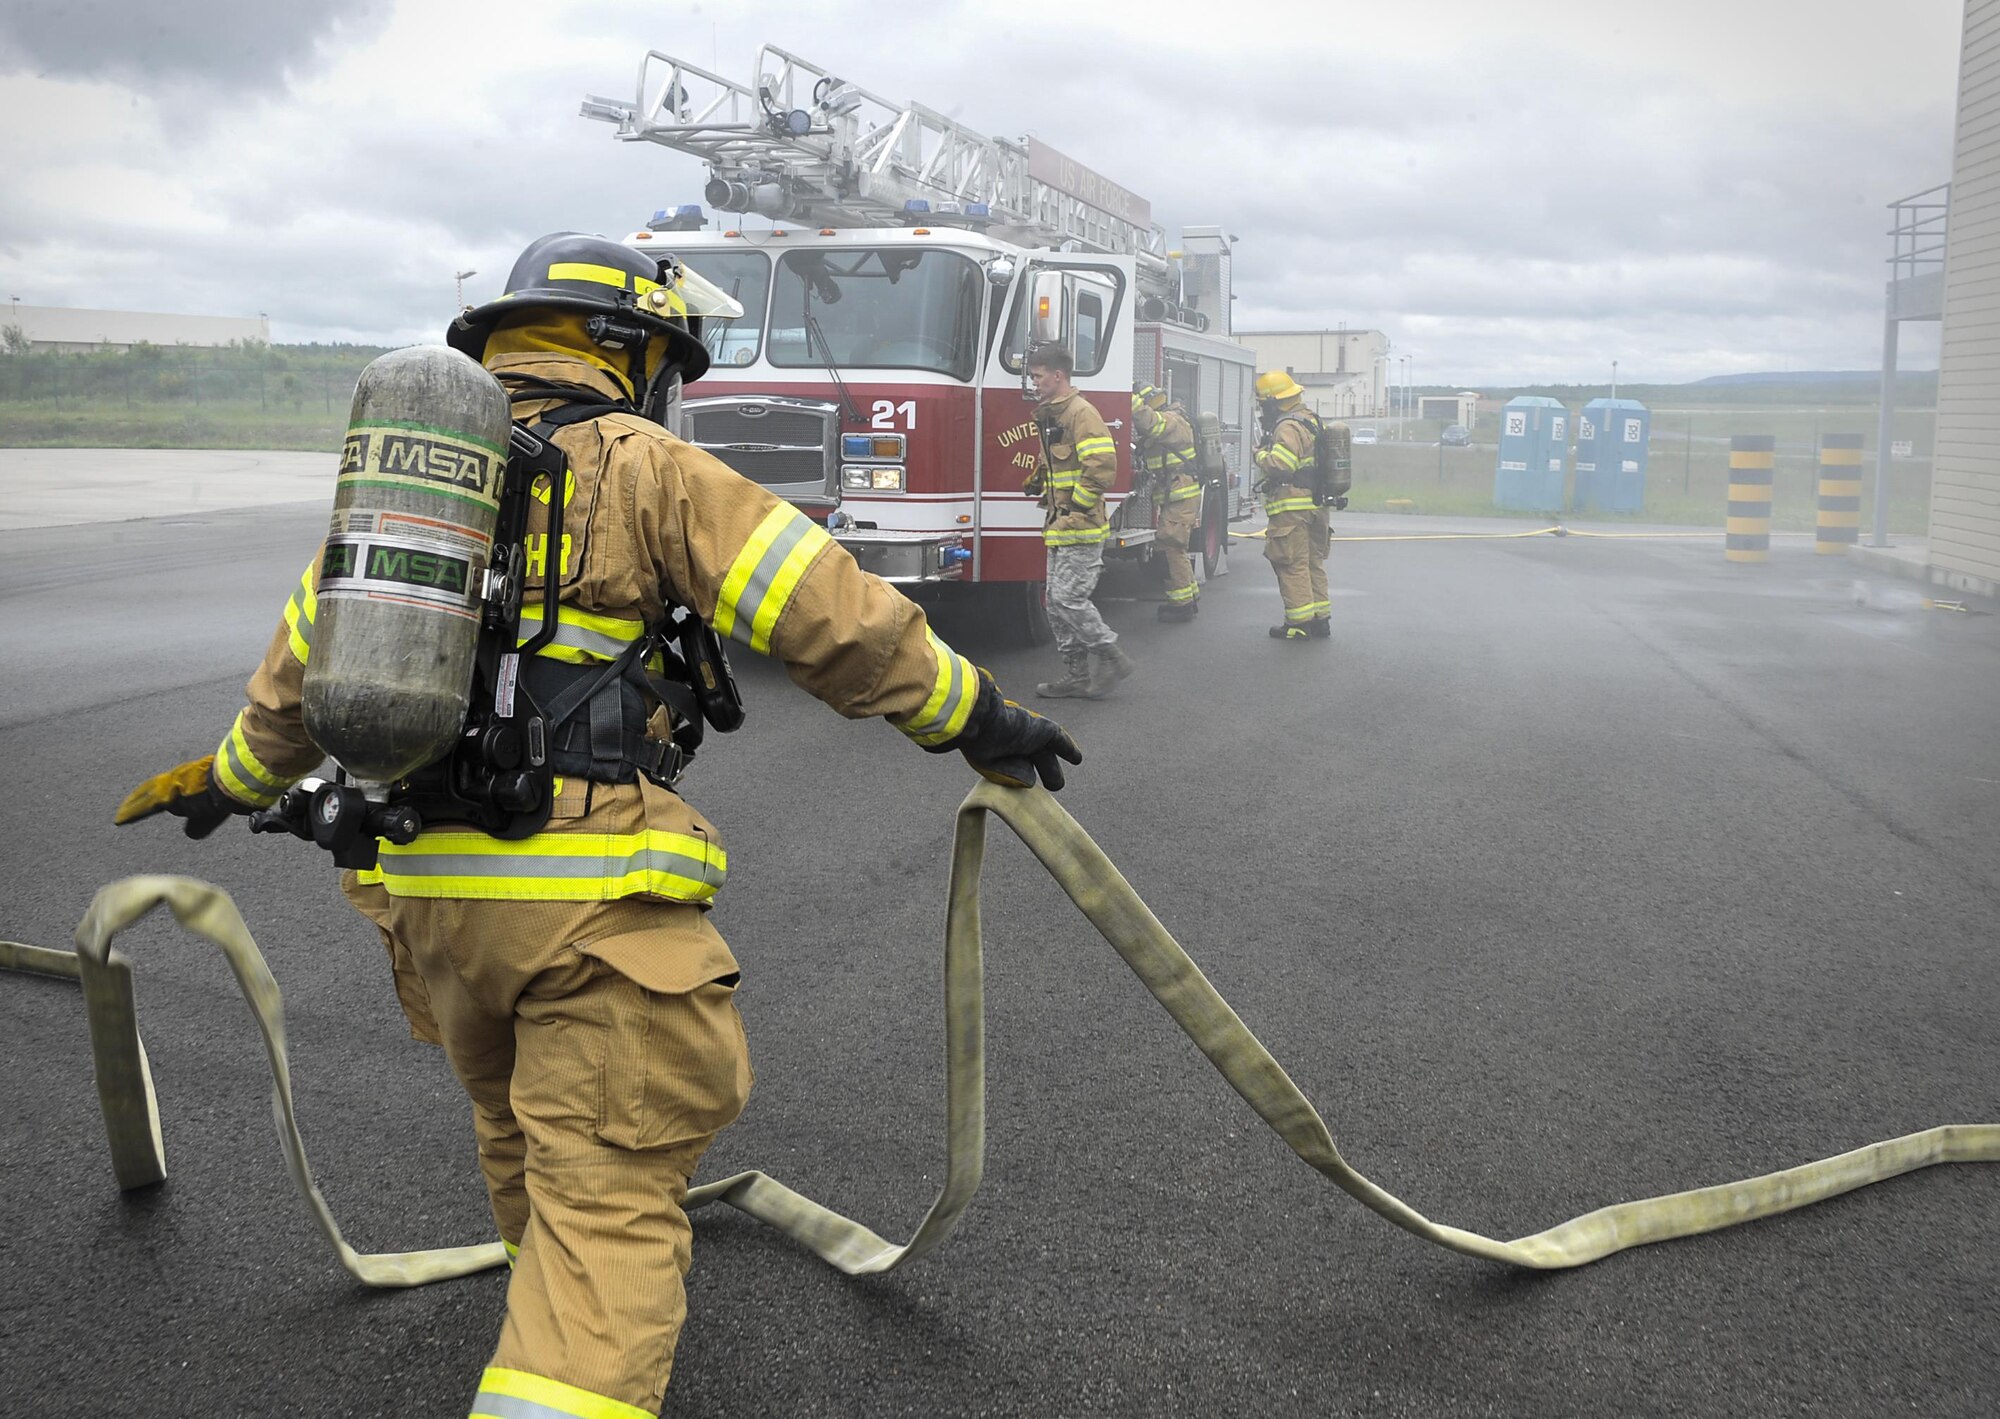 Airmen from the 86th Civil Engineer Squadron prepare fire hoses during a biannual-training exercise June 2, 2016, at Ramstein Air Base, Germany. Though Airmen are required to conduct each type of training annually, they continuously work to maintain and expand their skillsets. (Senior Airman Larissa Greatwood)